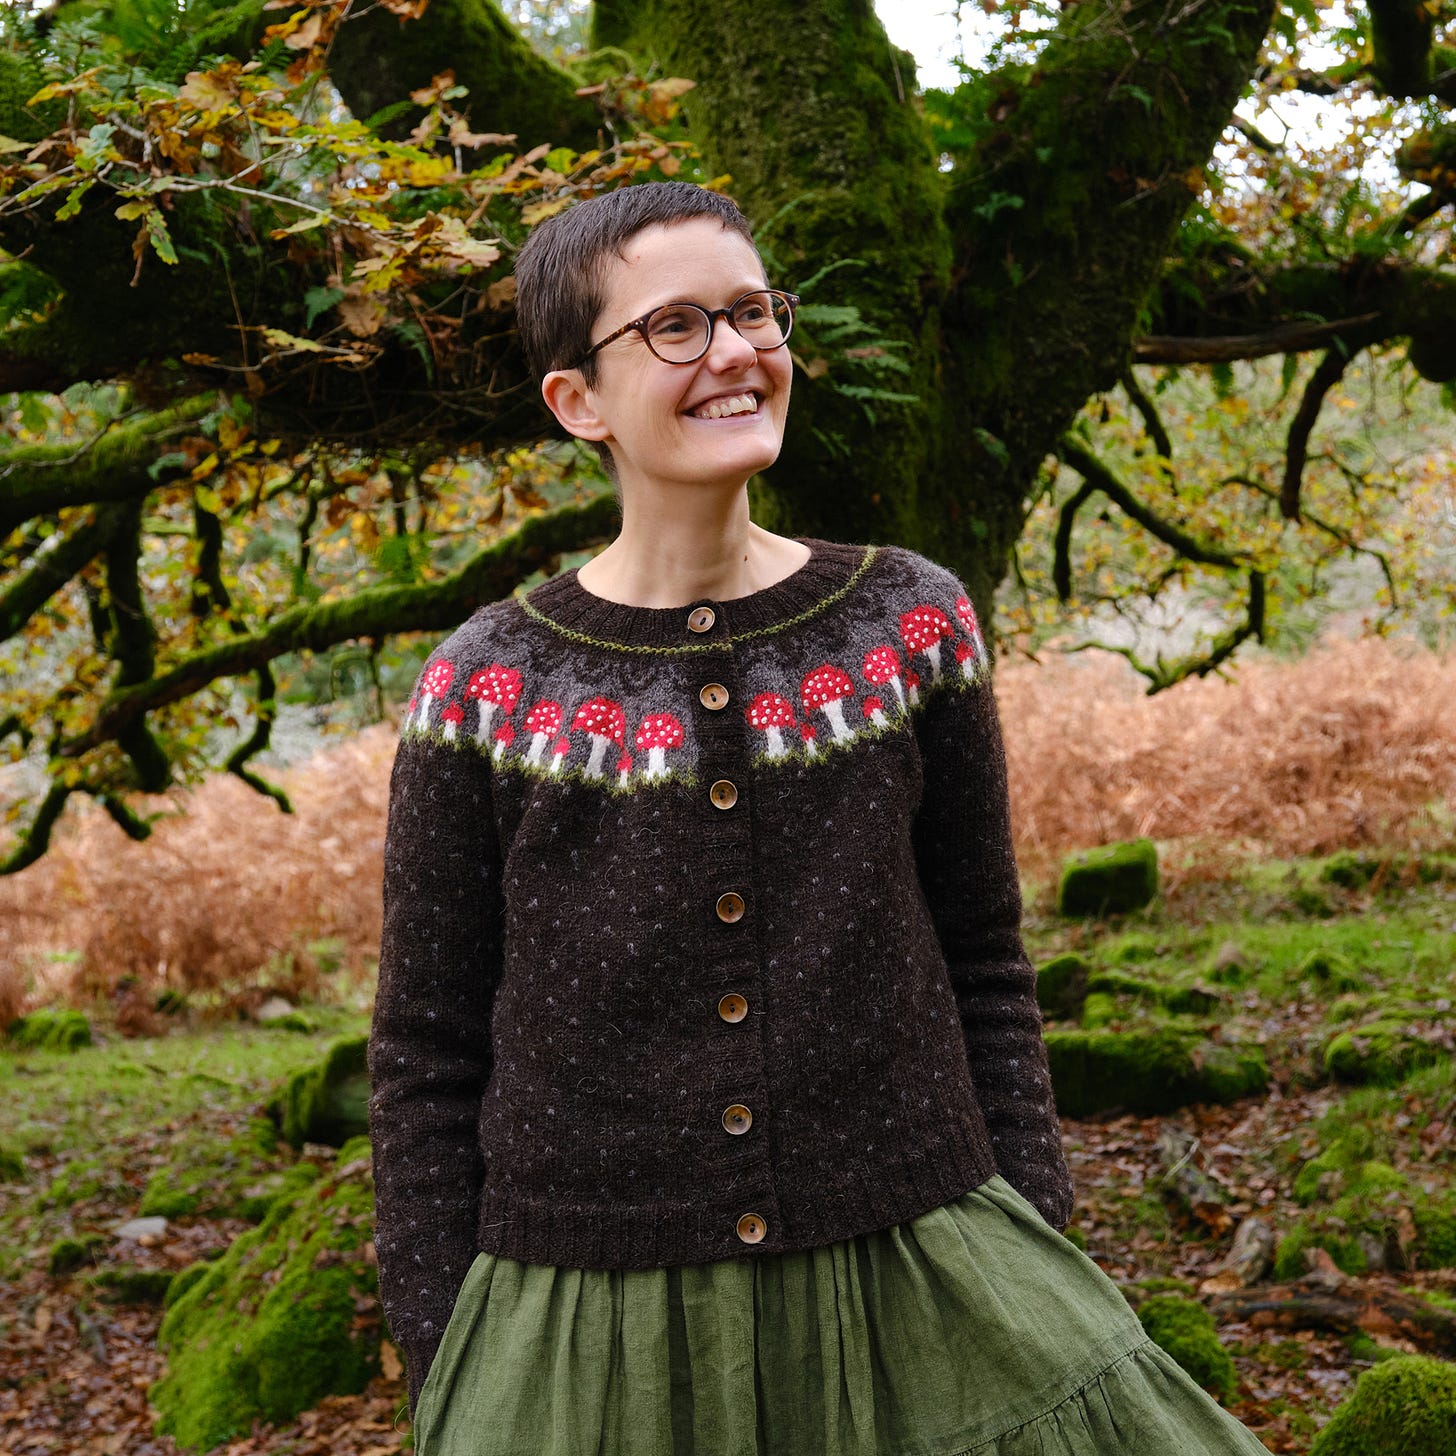 Image description: Katie, a white human with short hair and glasses, with hands in pockets and looking off to right of frame, grinning. Katie is wearing a dark brown spotted cardigan with a colourwork yoke of red spotty fly agaric mushrooms. Behind Katie is a big mossy oak tree. 